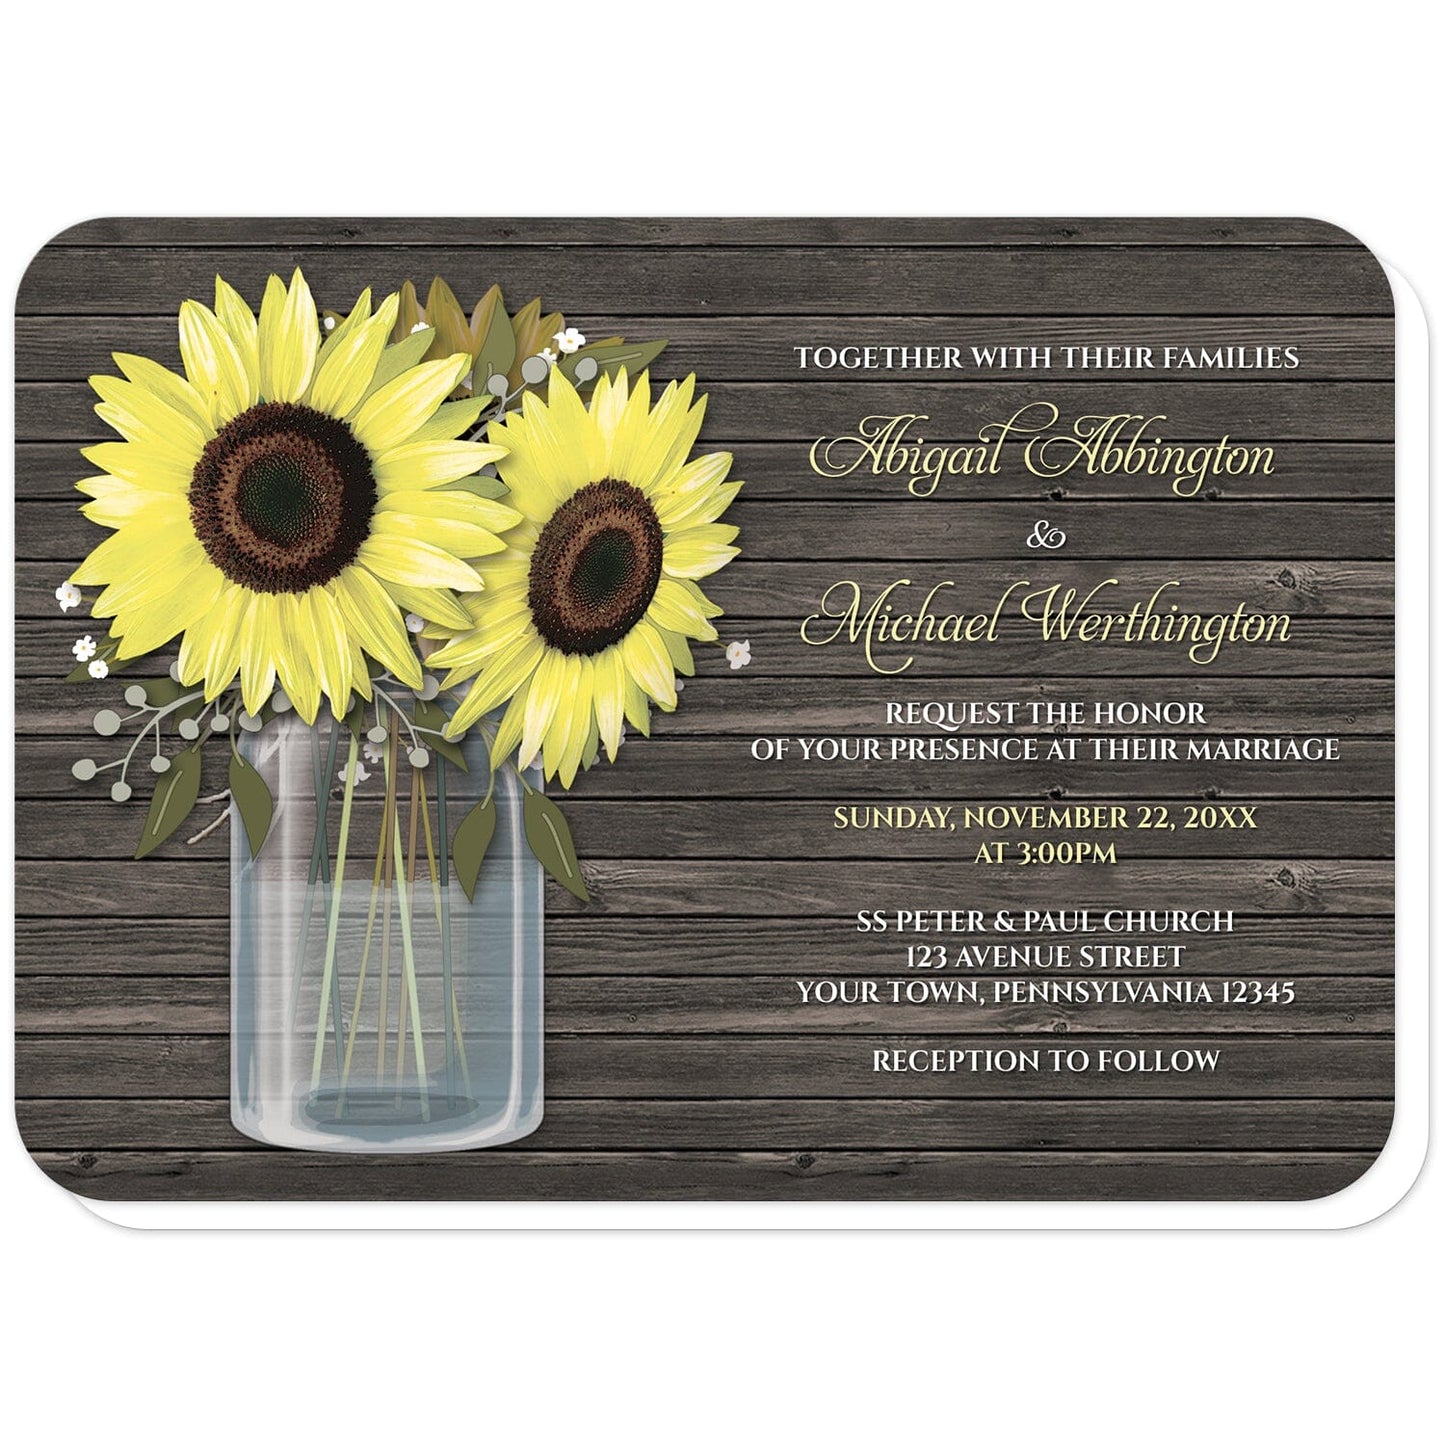 Rustic Sunflower Wood Mason Jar Wedding Invitations (with rounded corners) at Artistically Invited. Southern country-inspired rustic sunflower wood mason jar wedding invitations with big yellow sunflowers, small accents of baby's breath, and green leaves in a glass mason jar illustration. Your personalized marriage celebration details are custom printed in yellow and white to the right of the sunflowers and mason jar design over a dark brown wood background.